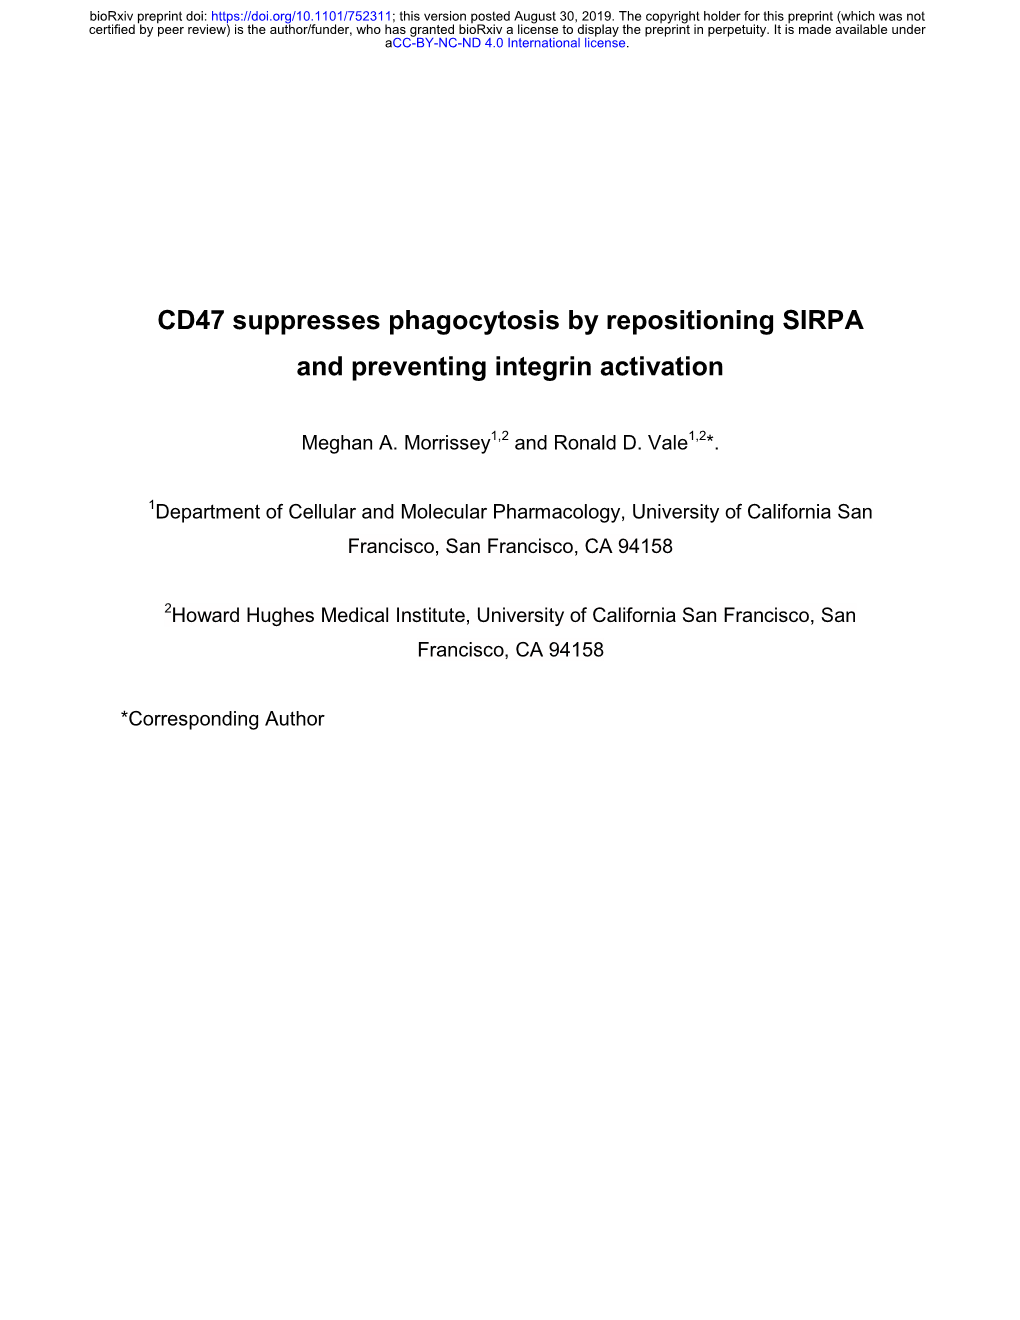 CD47 Suppresses Phagocytosis by Repositioning SIRPA and Preventing Integrin Activation